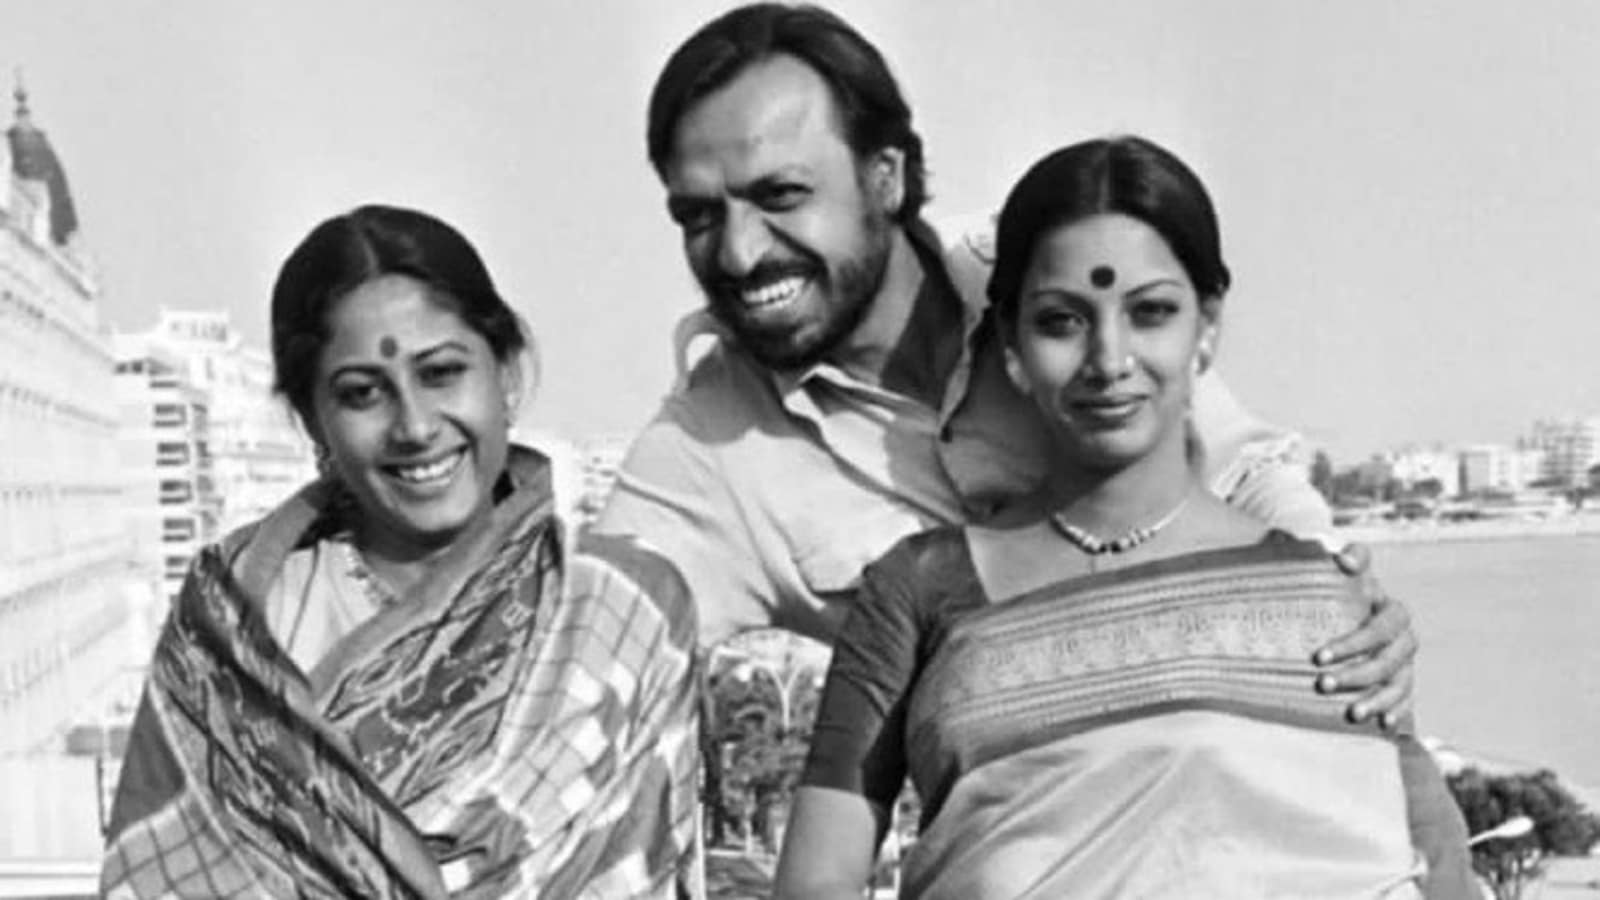 Shabana Azmi recalls how she and Smita Patil urged viewers personally to watch Shyam Benegal’s Nishant at 1976 Cannes